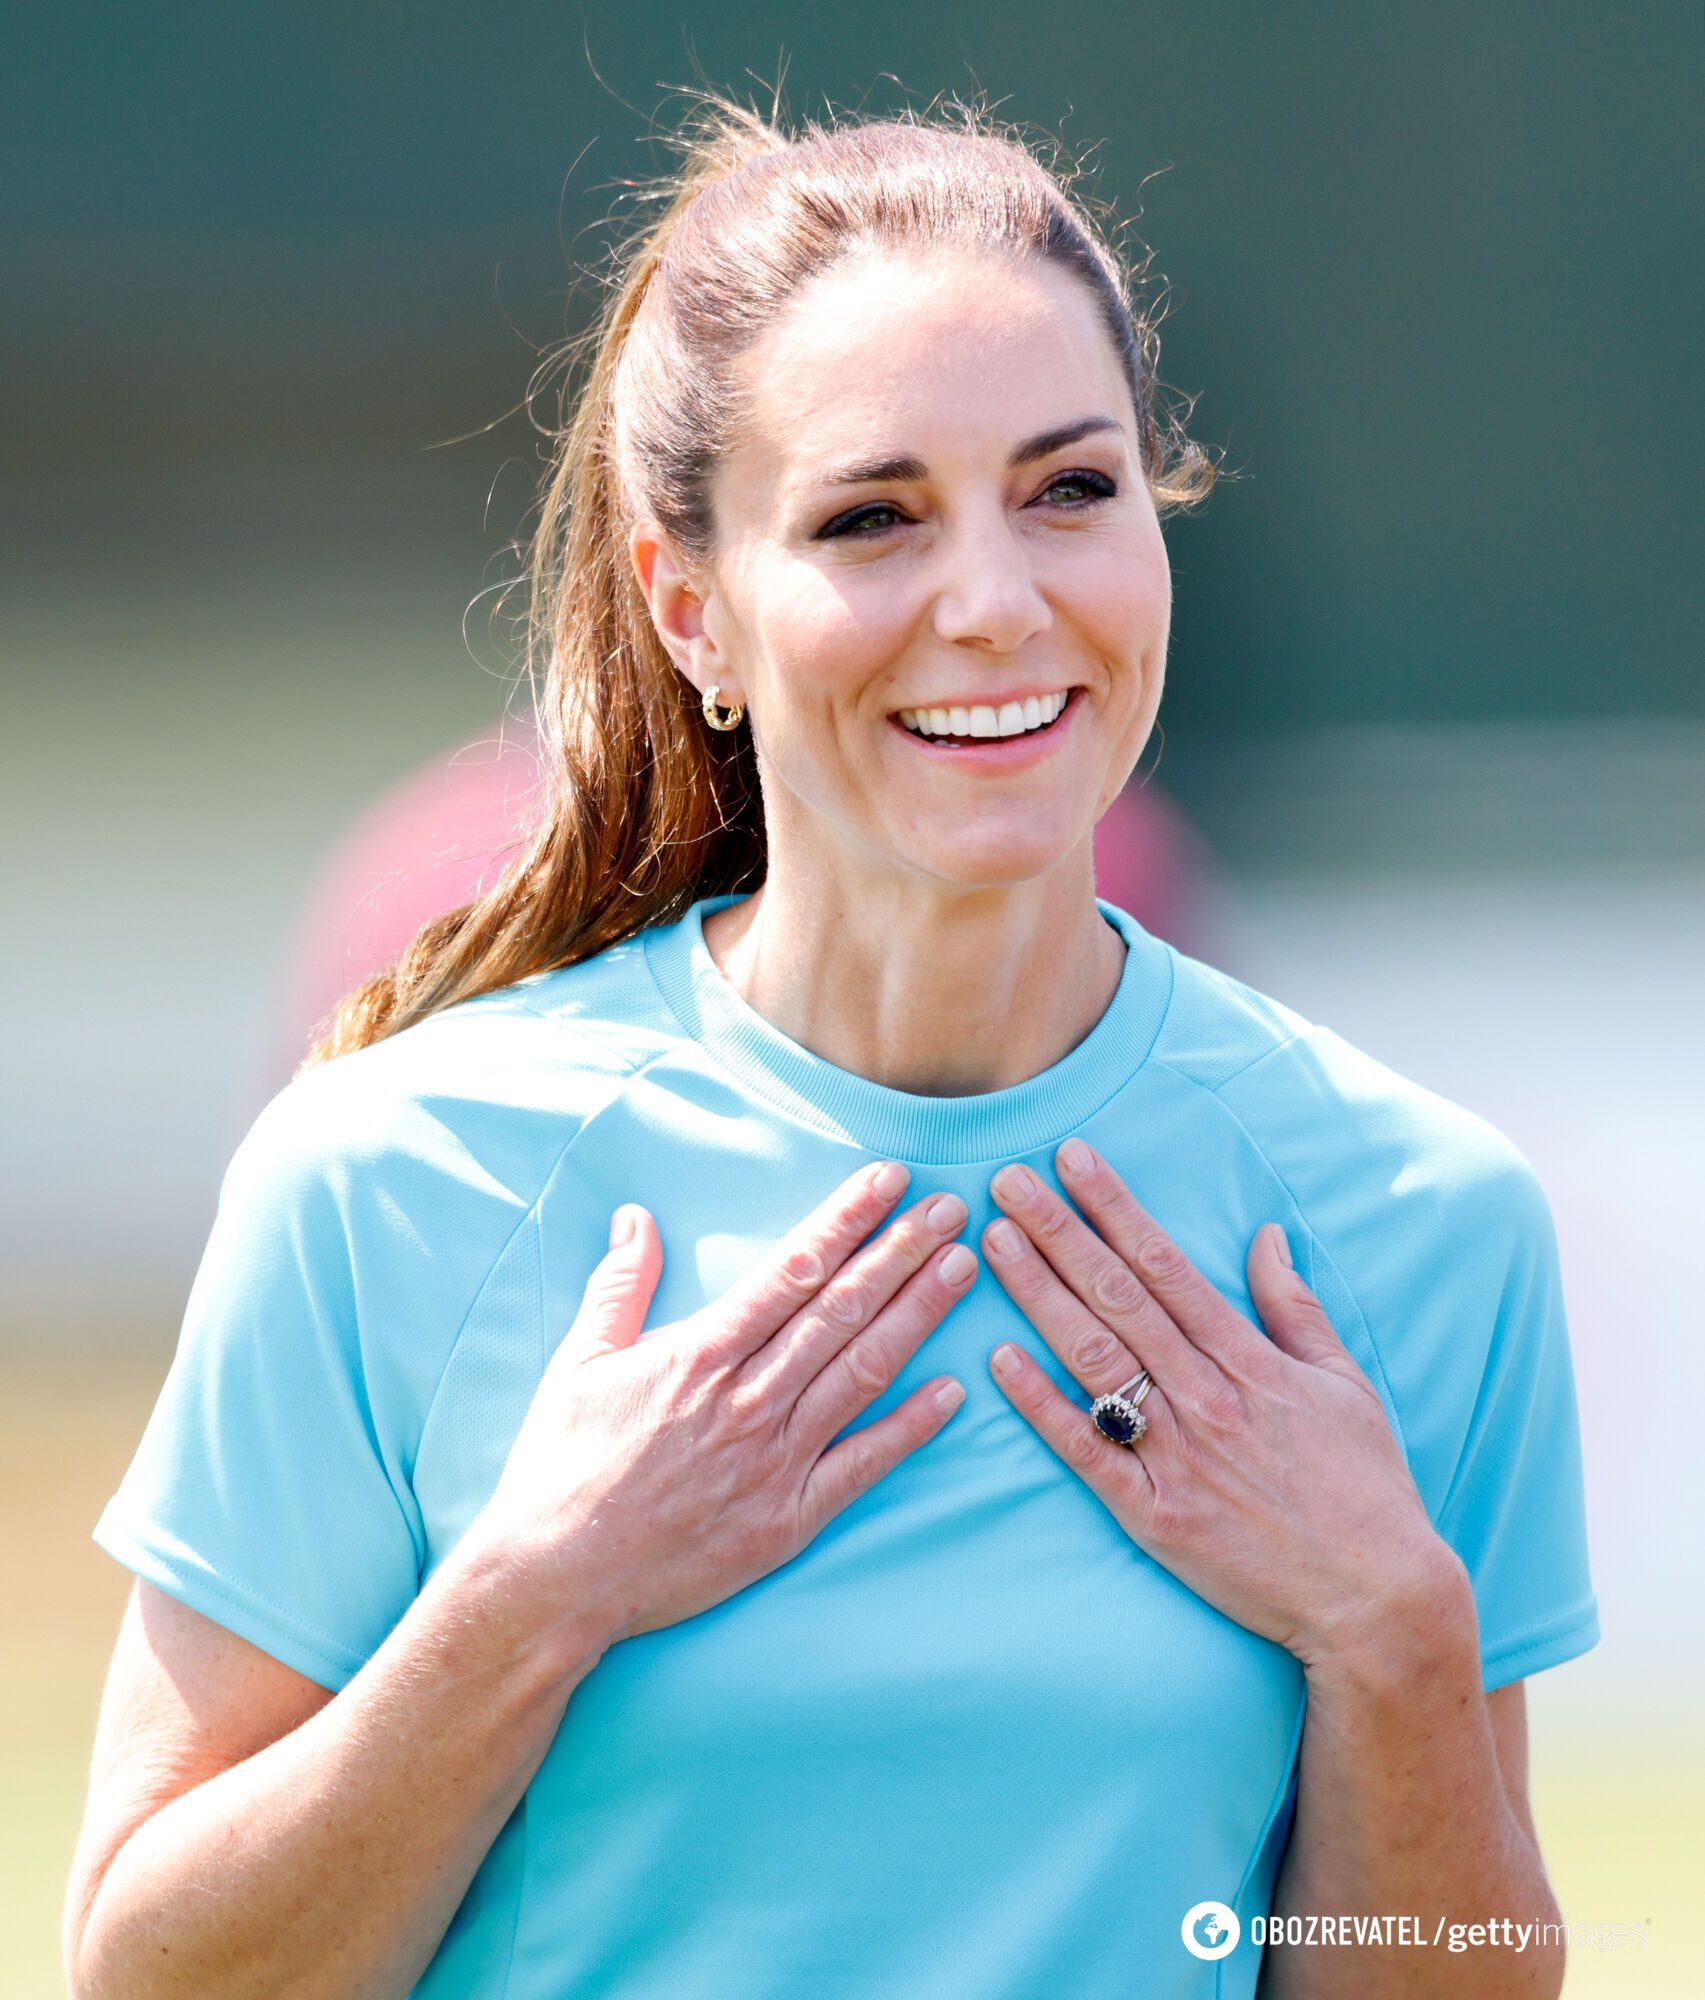 It became known why Prince William never wears a wedding ring, although Kate Middleton does not take hers off